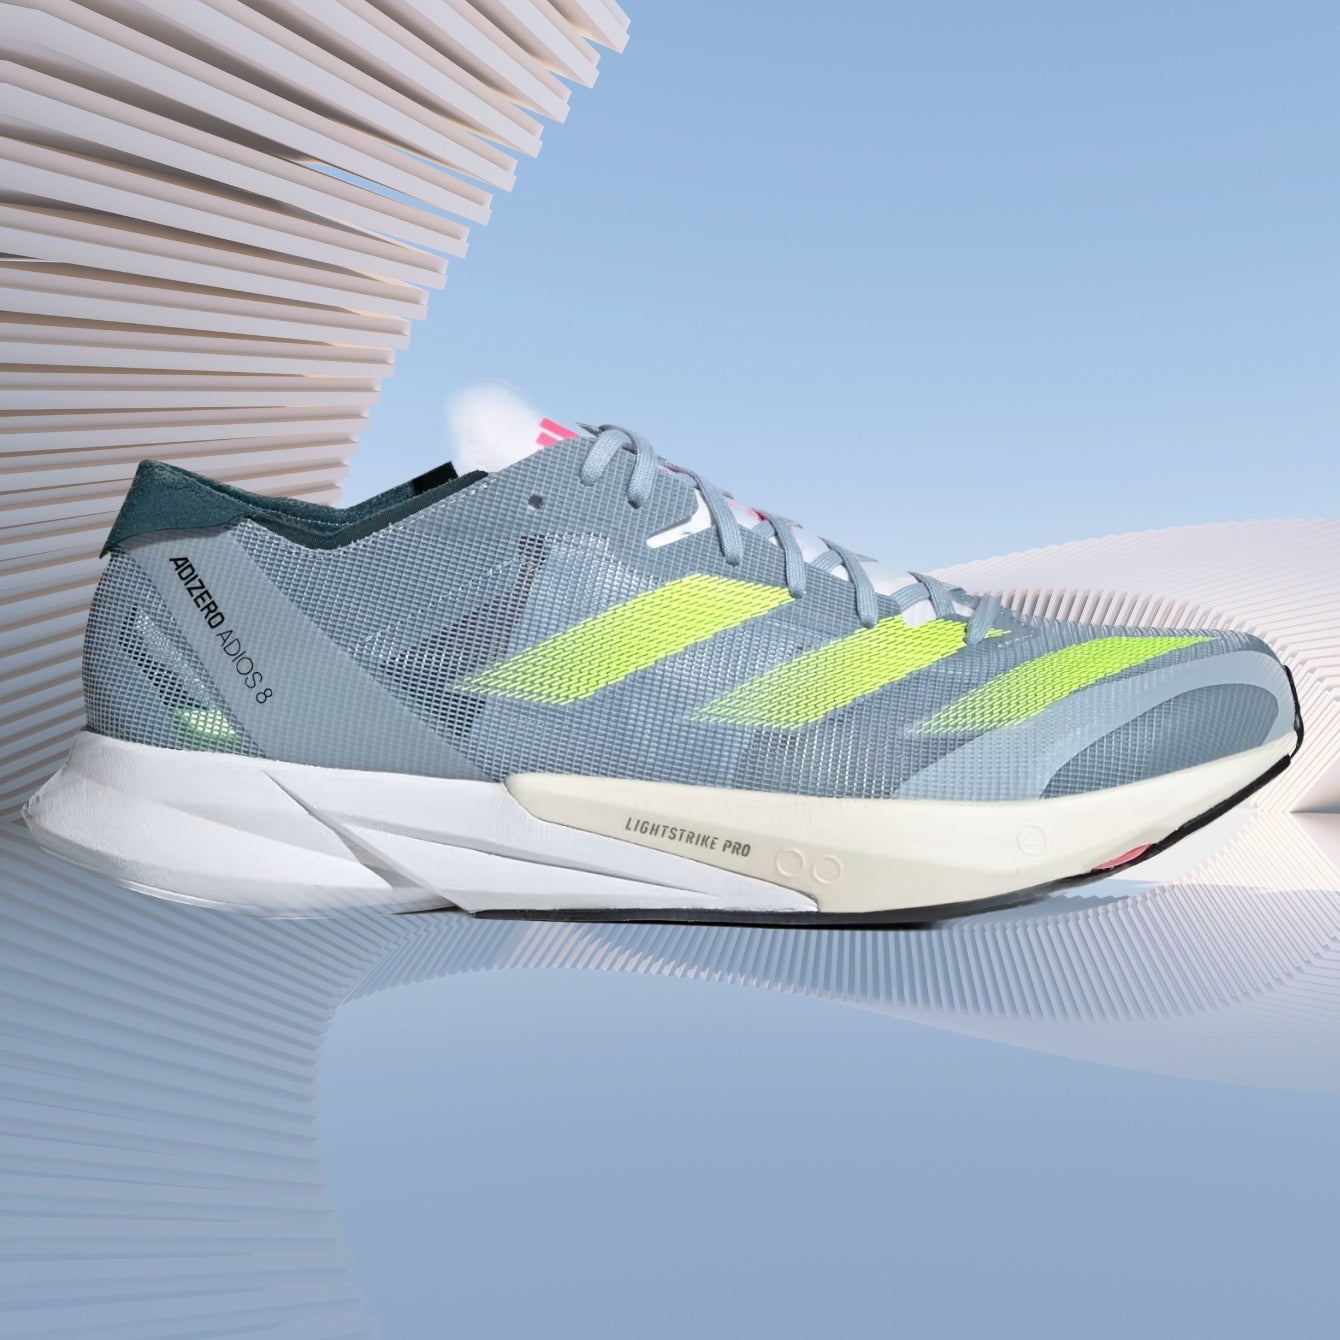 Why the New Adidas Adios 8 Is My Favorite Speedy Shoe